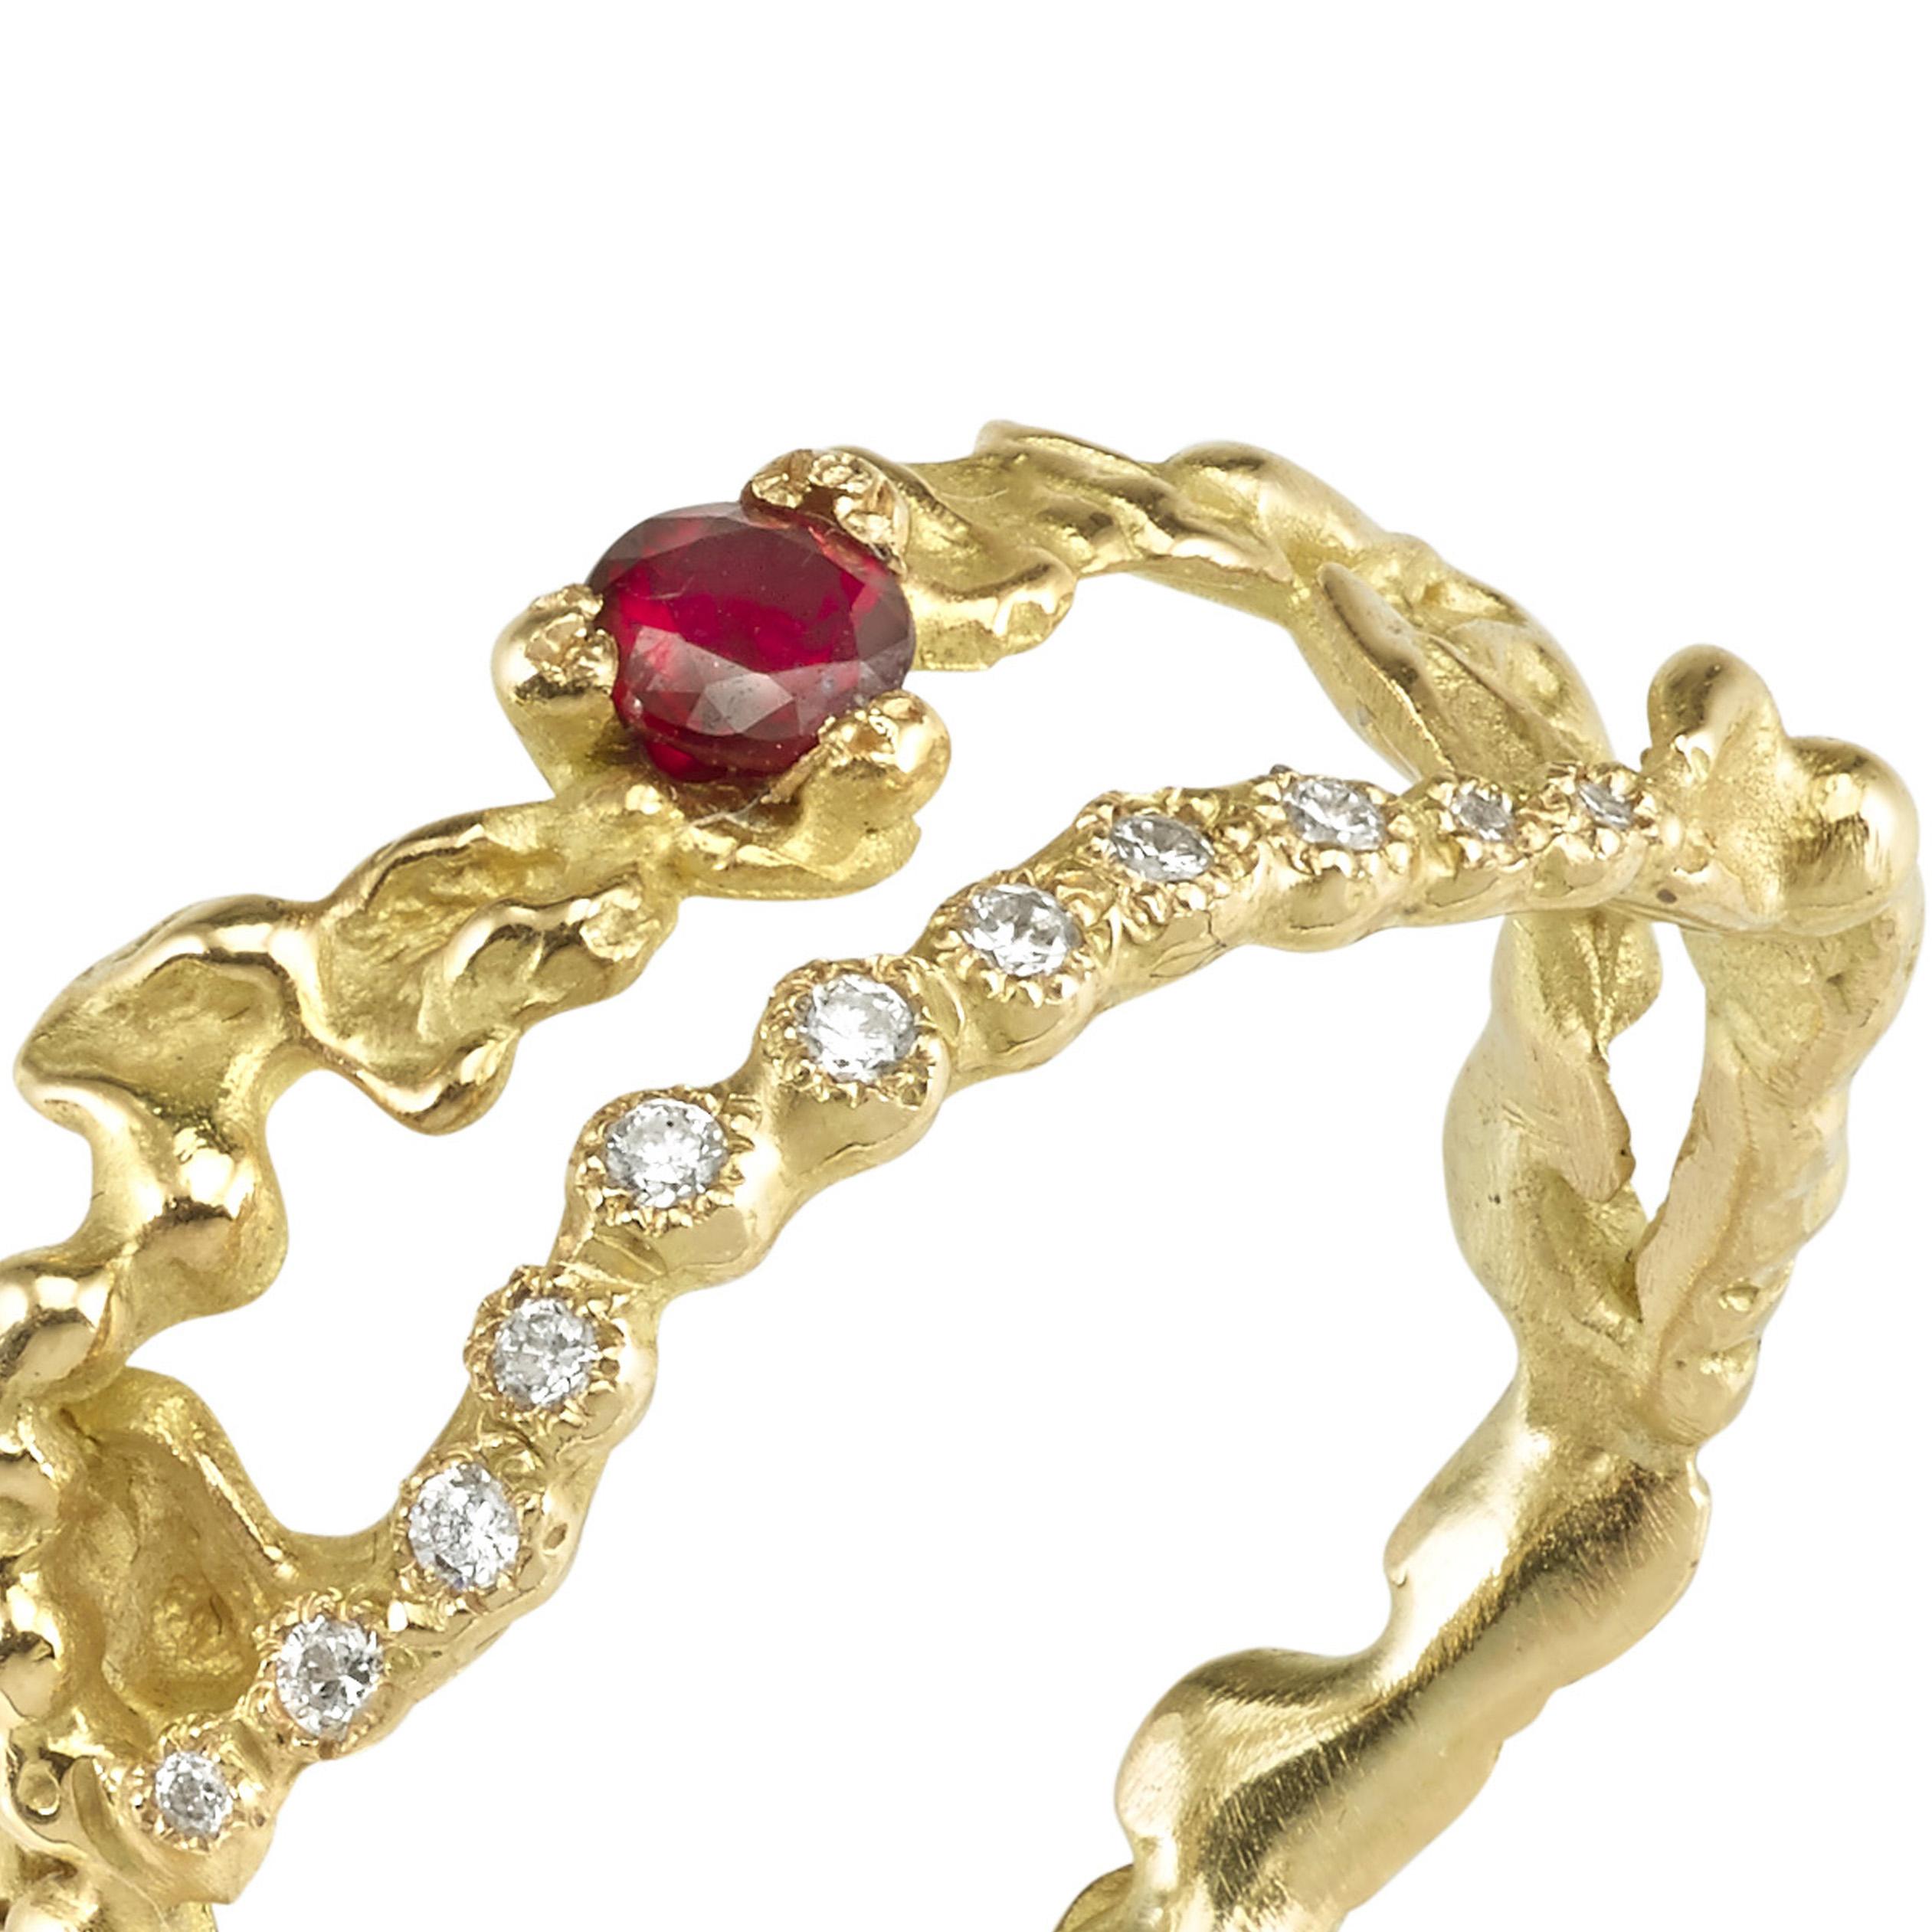 This Anais Rheiner ring is 18 Karat yellow gold approximately 3.5 grams. It is chiseled and assembled with asymmetric arabesque patterns. It is set with a ruby of approximately 0.02 carat and diamonds.
It can be made to size upon request.
The